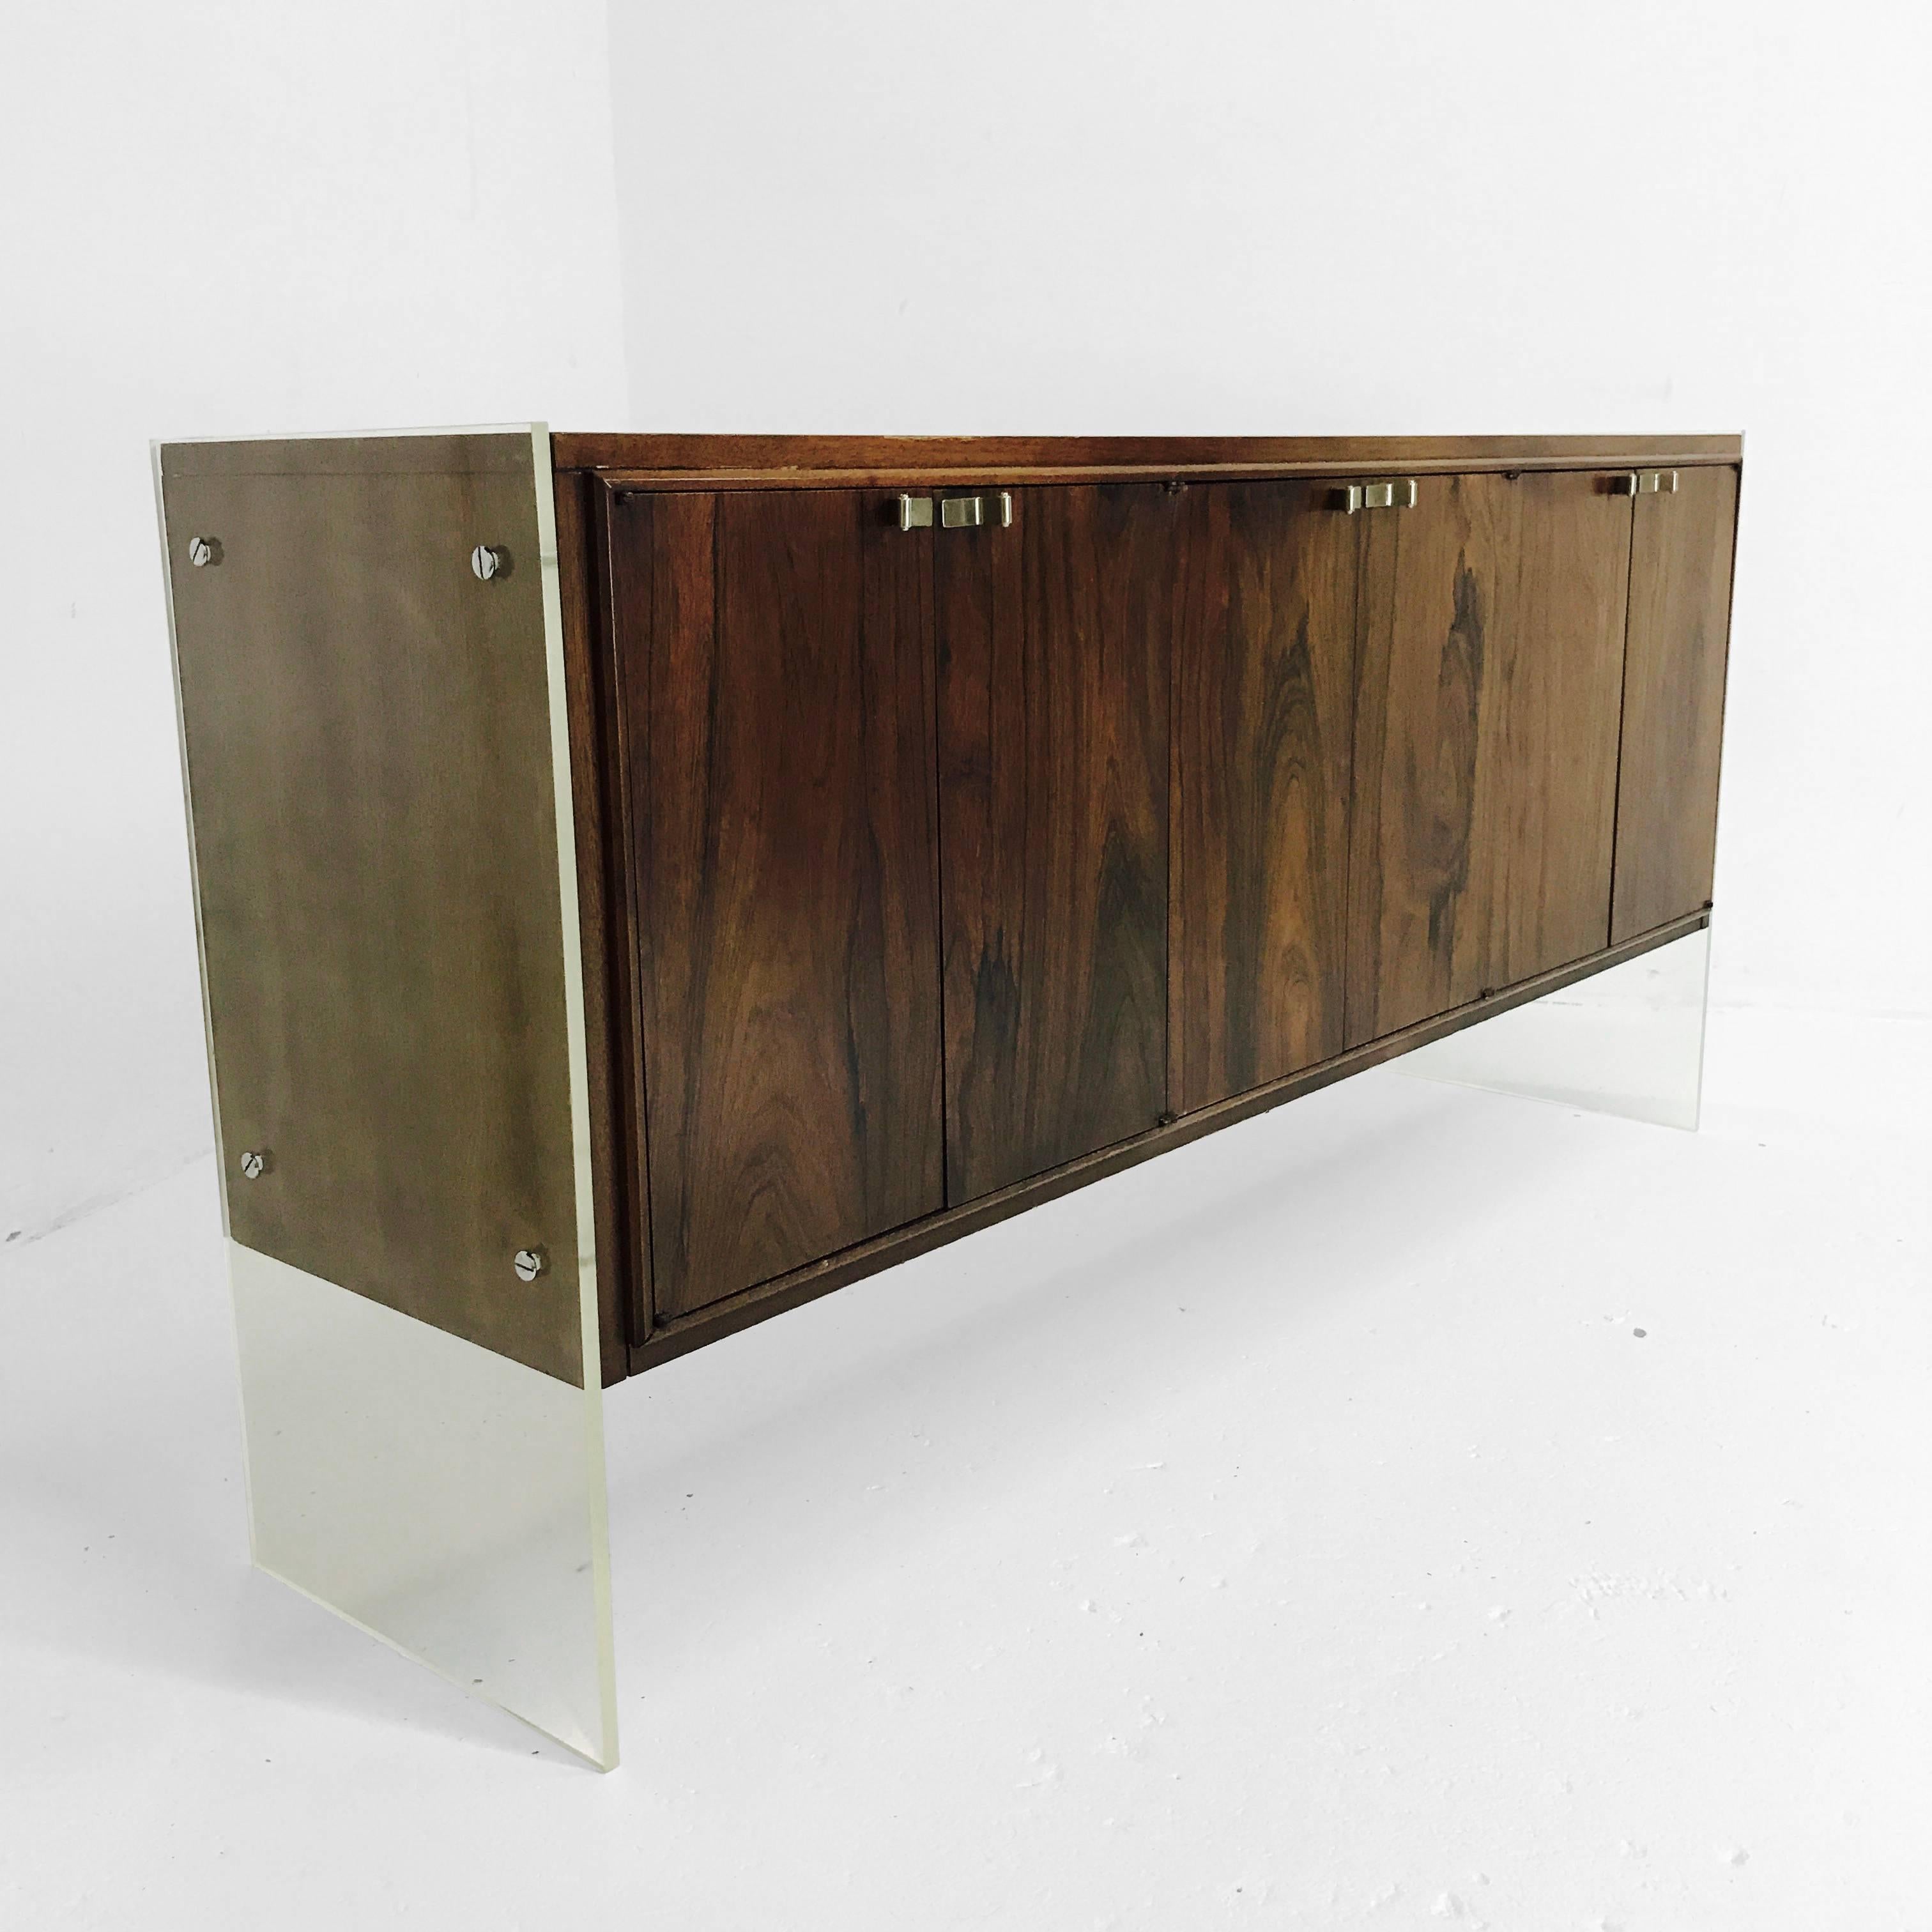 Credenza with Lucite slab sides and a solid wood construction by Flair. Credenza needs some TLC, circa 1960s

Dimensions: 66